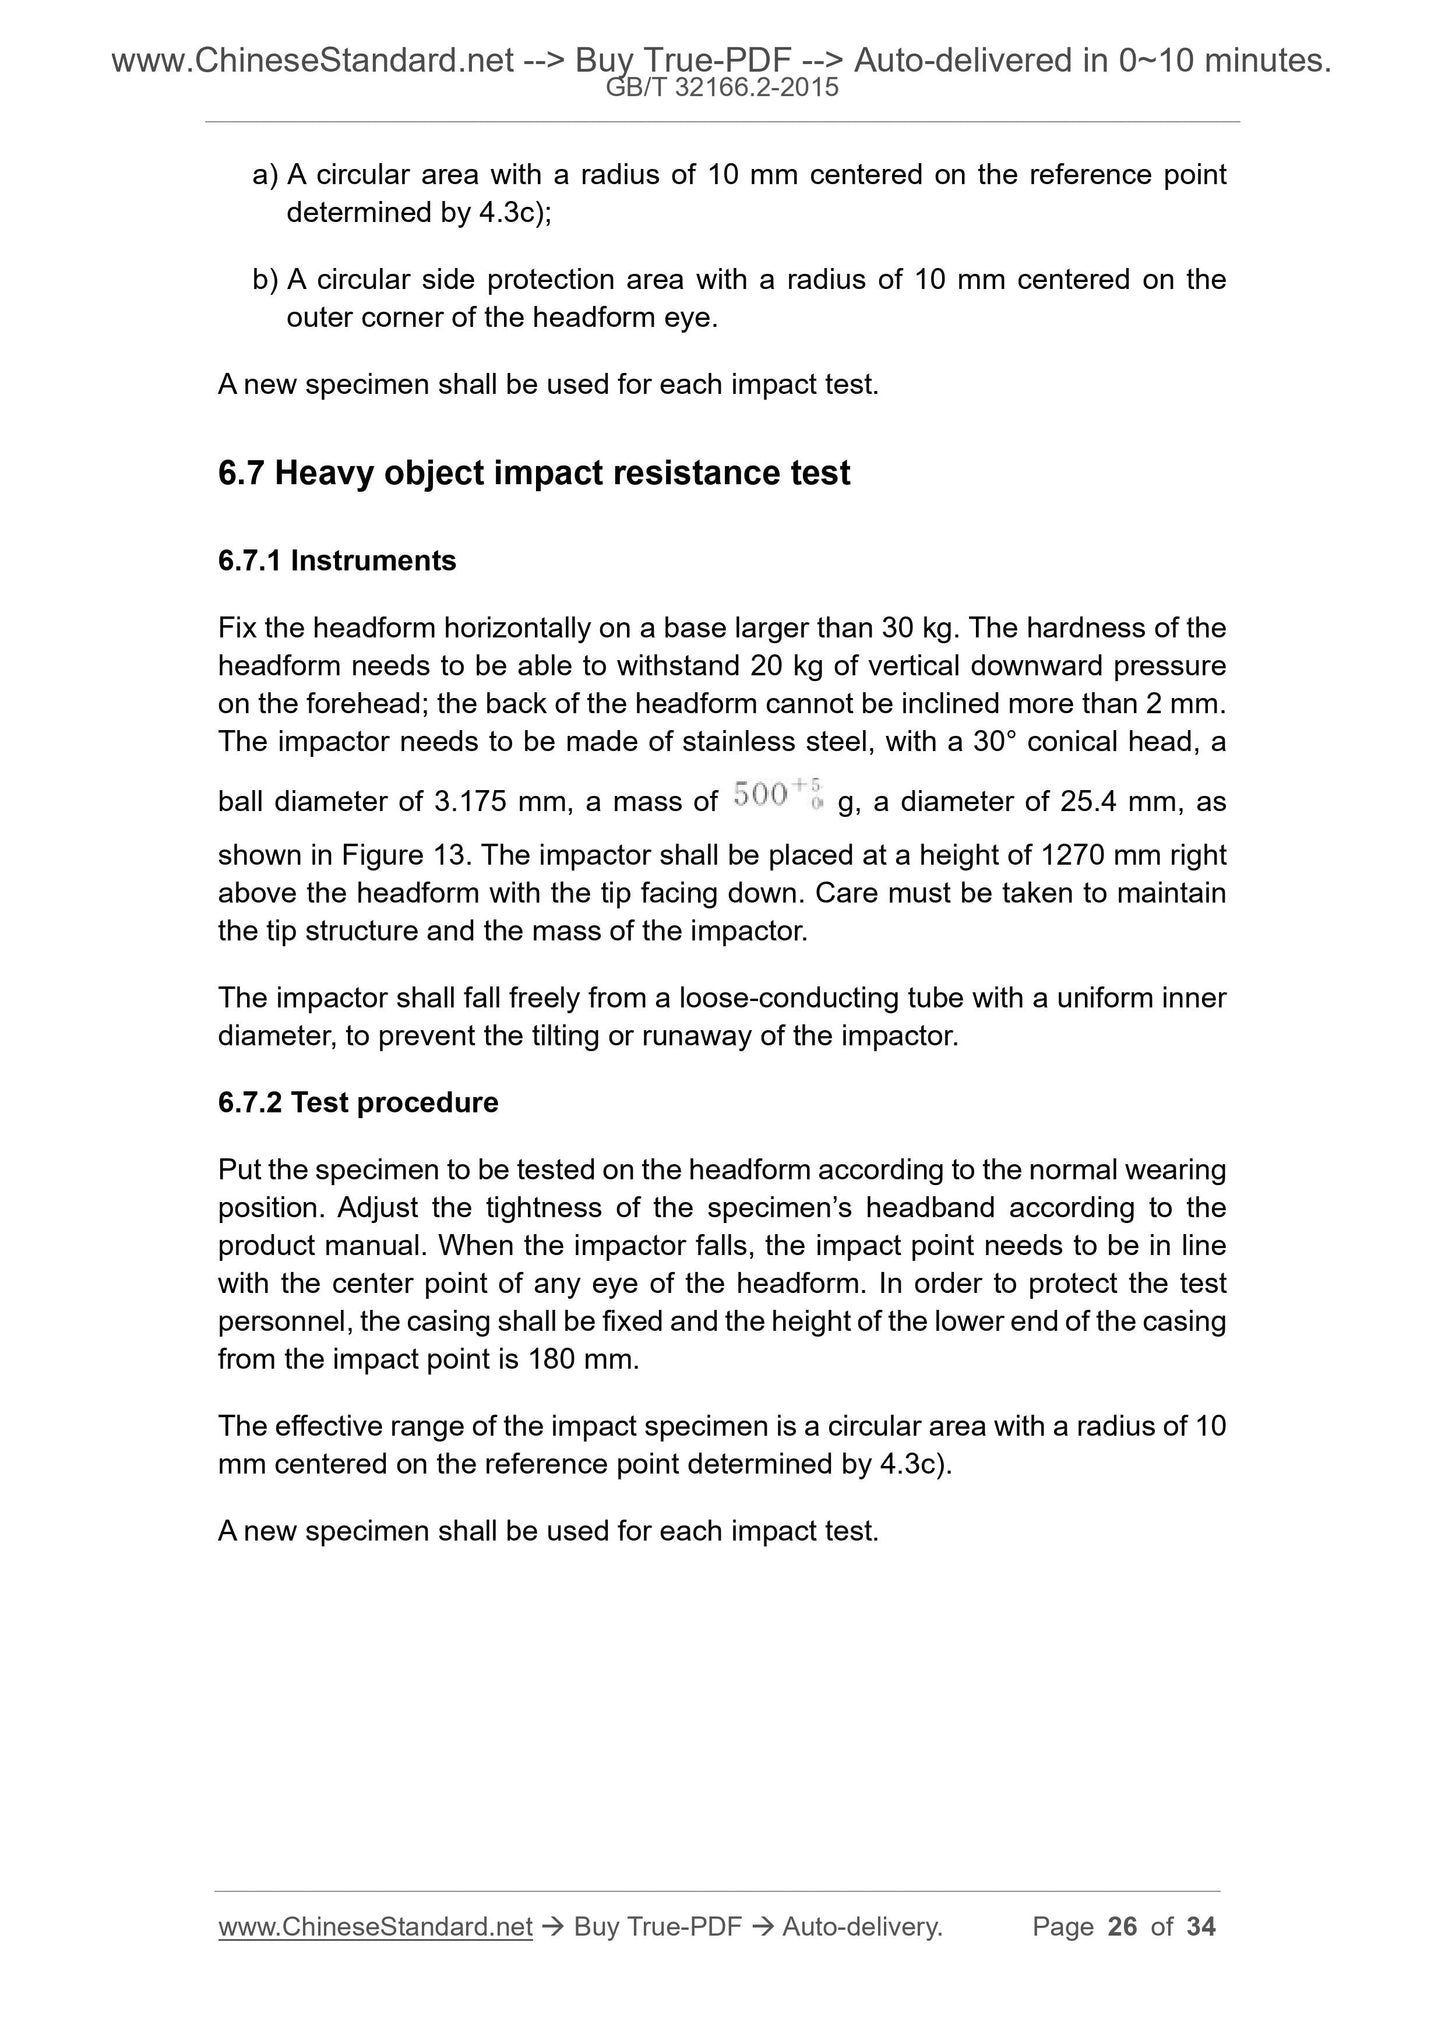 GB/T 32166.2-2015 Page 11